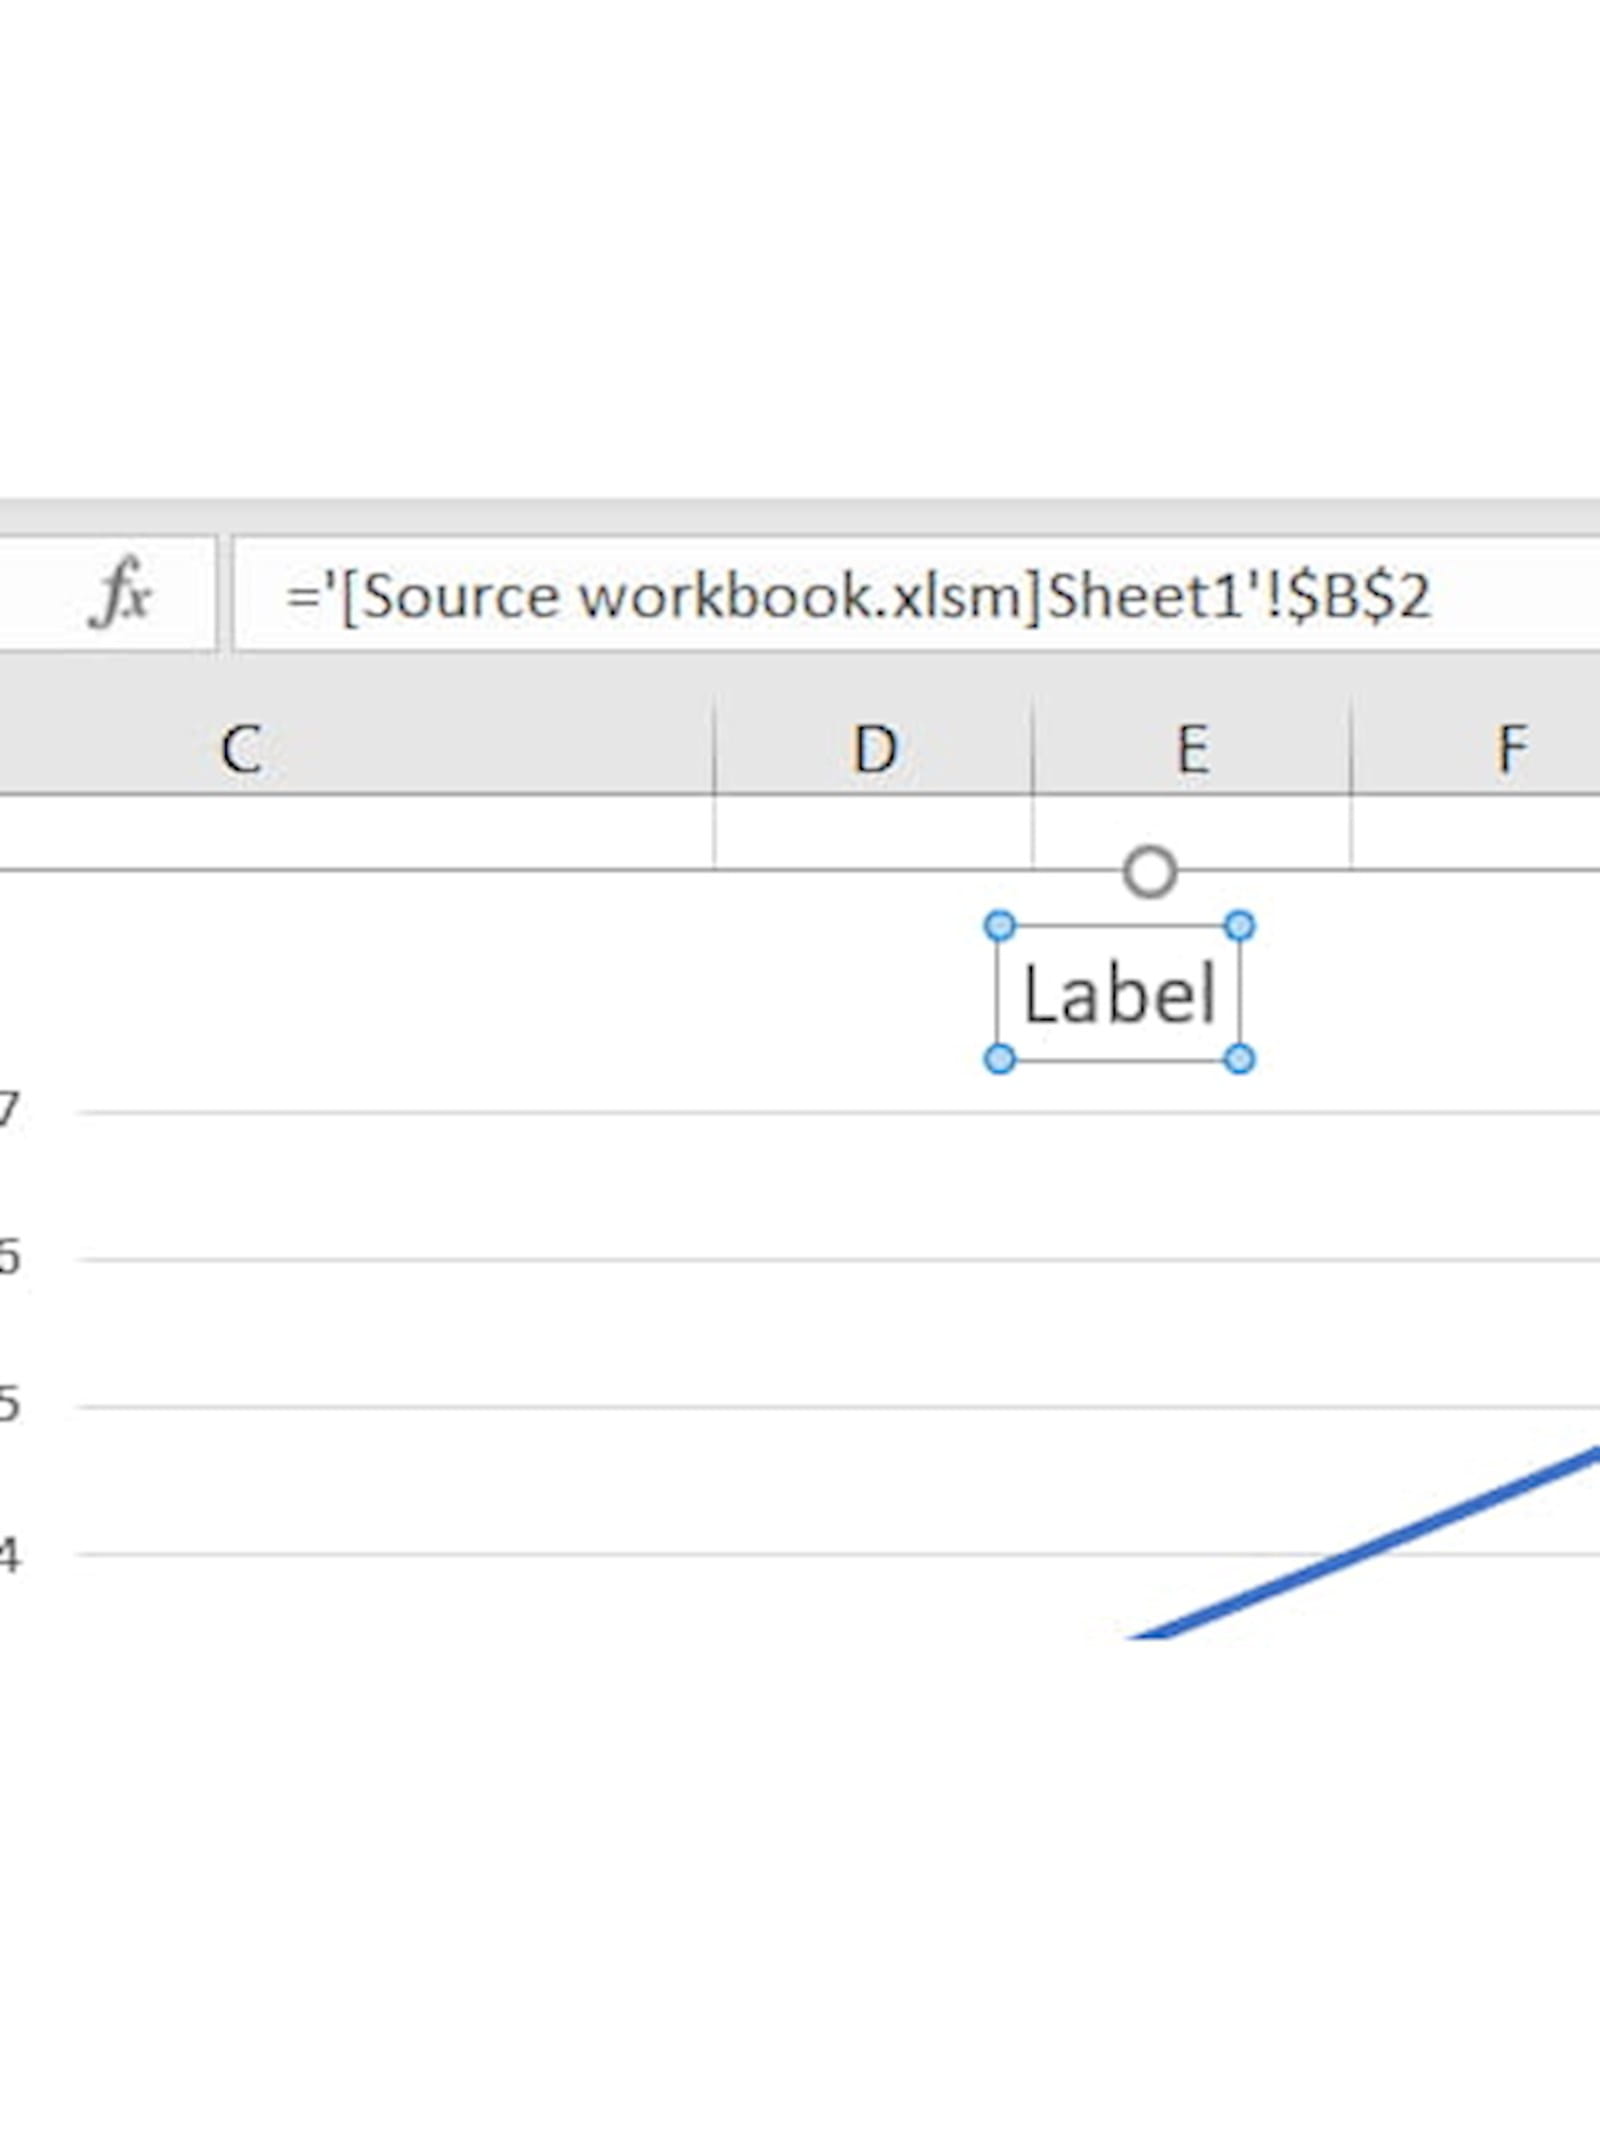 Excel screen shot of chart titles